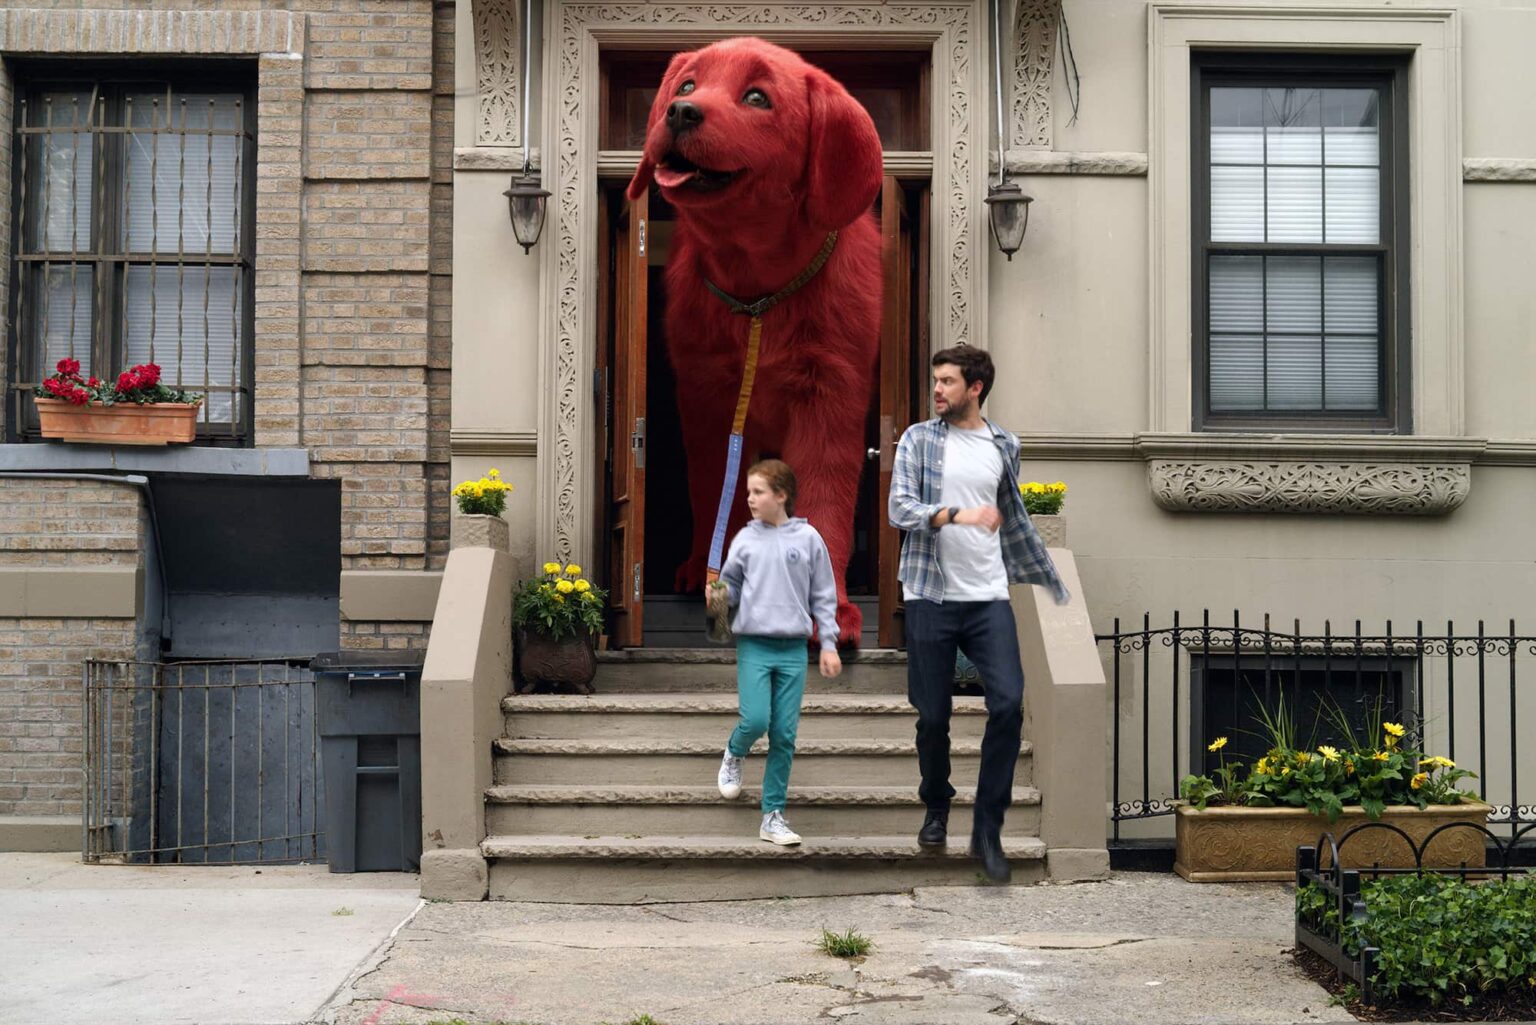 'Clifford the Big Red Dog' is out in theaters, but are you still wanting to stream the nostalgic pup? See where to watch every 'Clifford' show and movie.